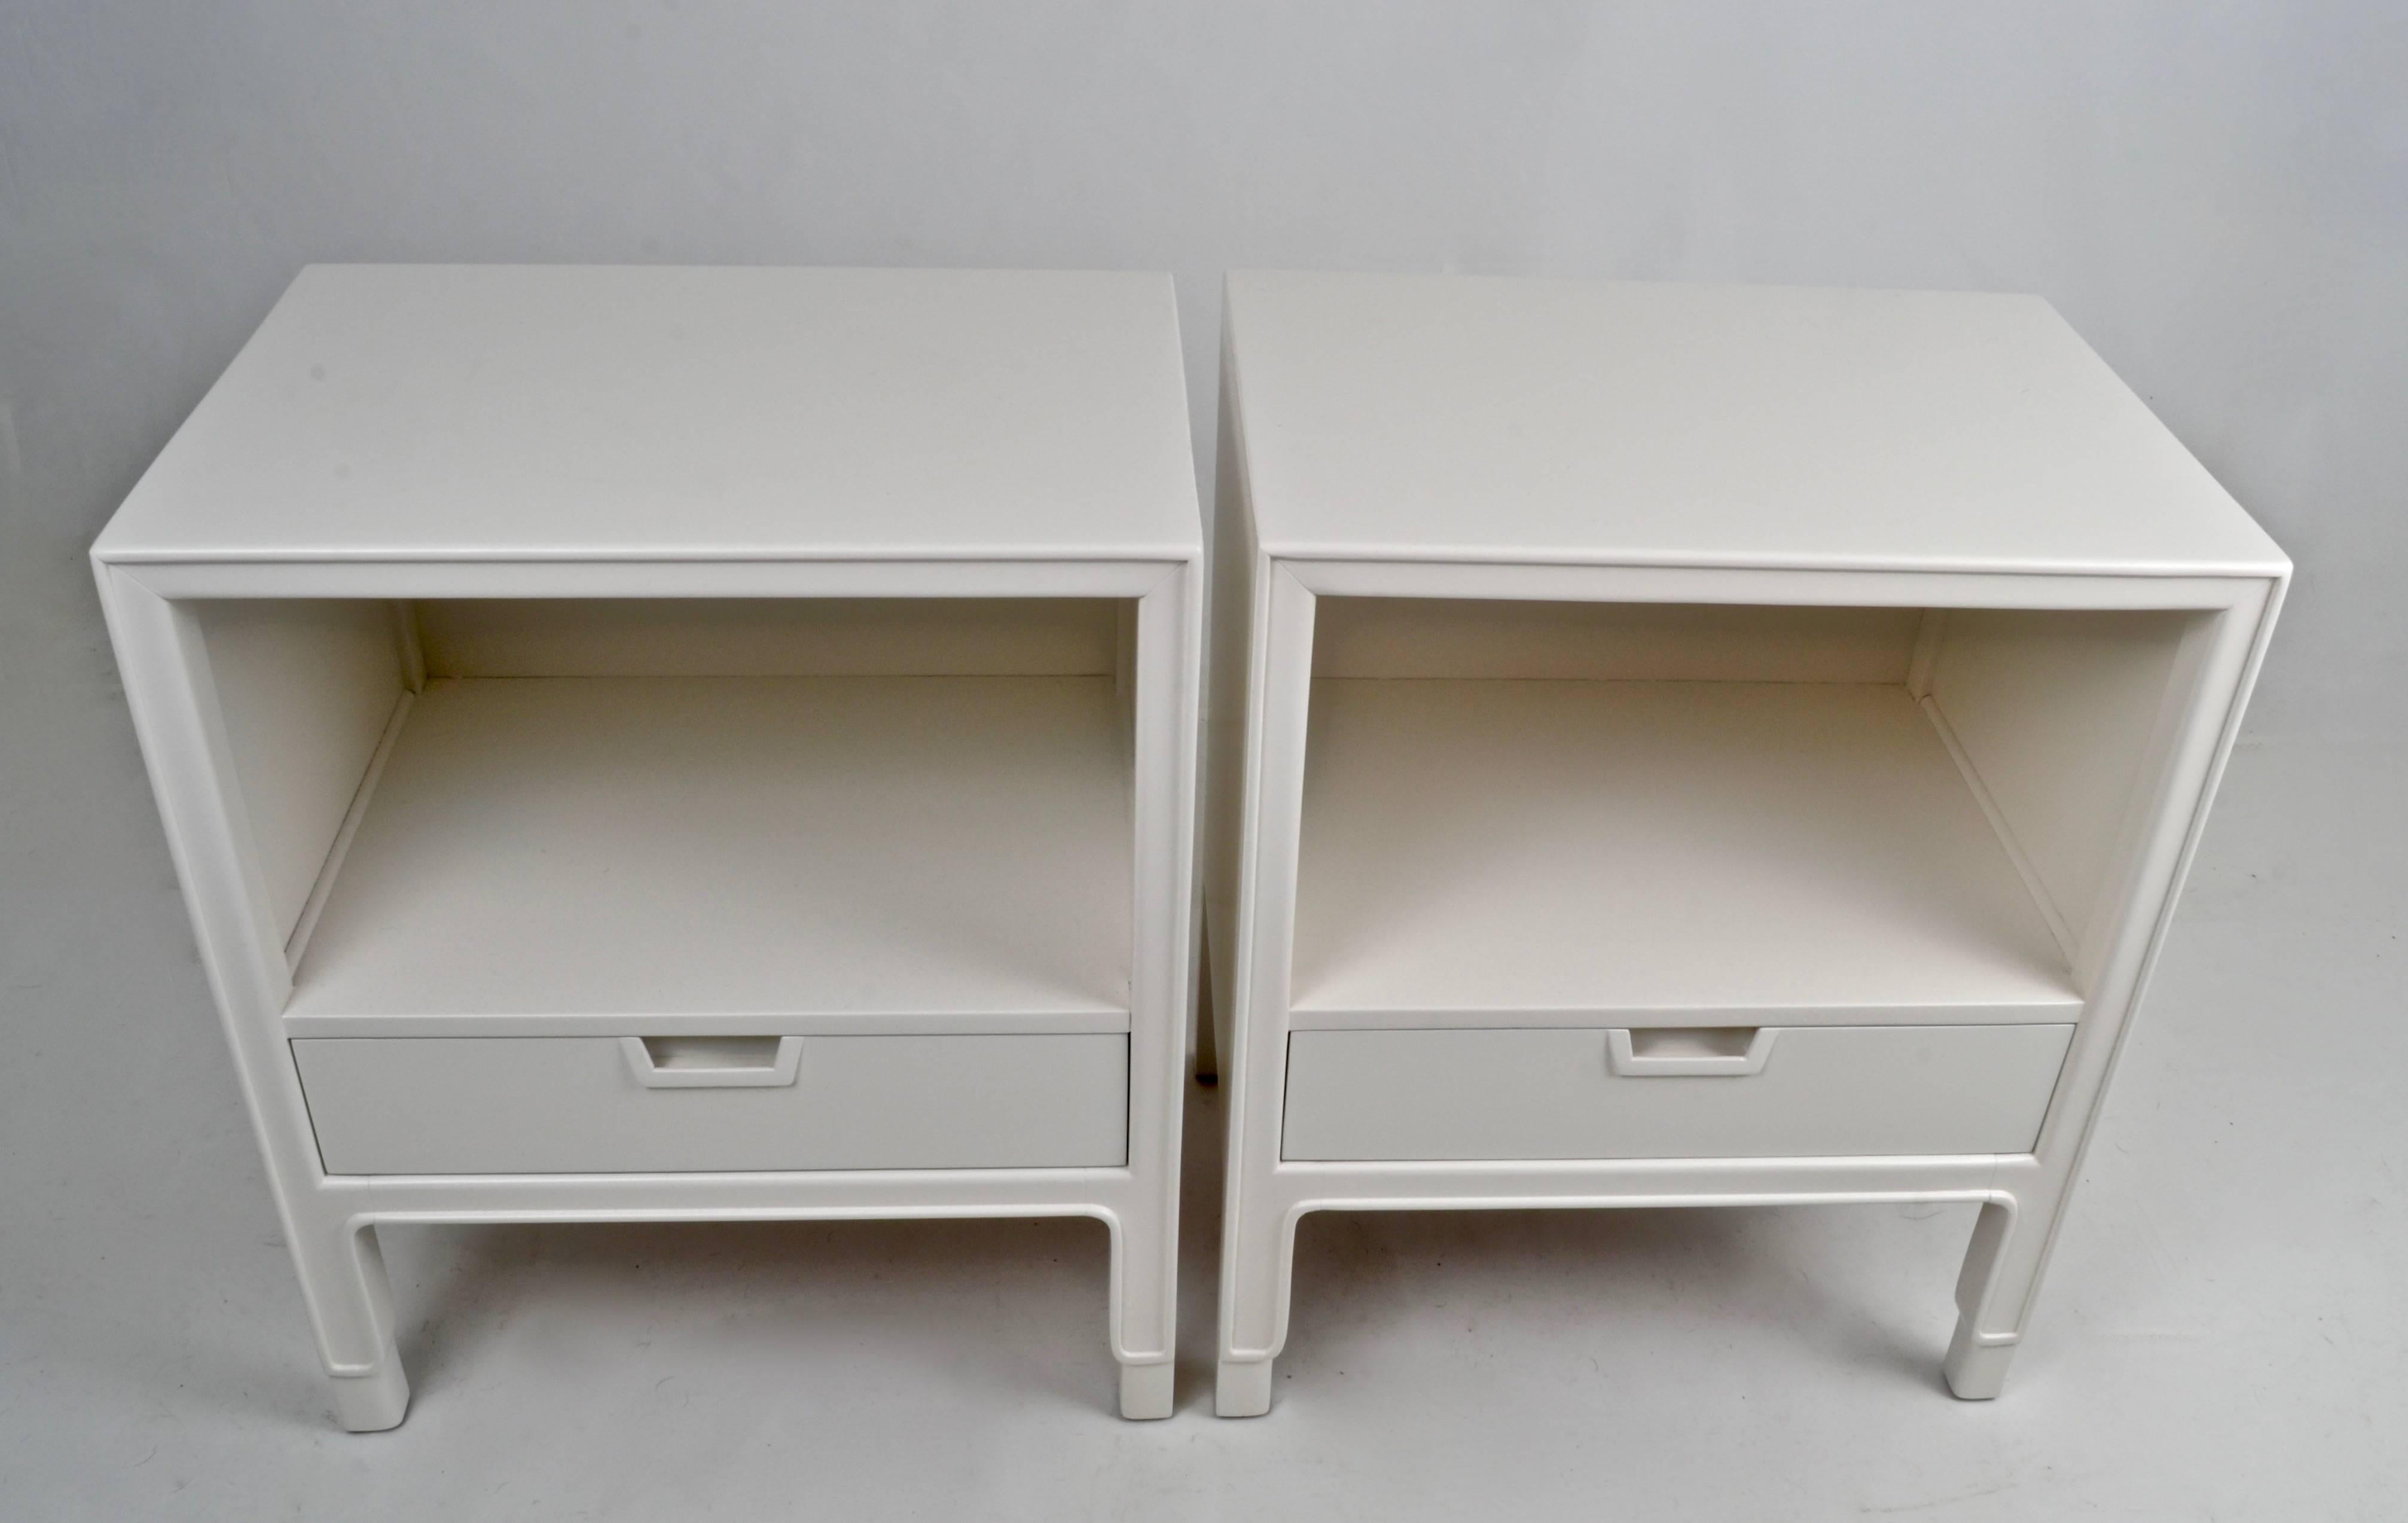 A quality pair of end table or nightstands newly lacquered in dove white satin finish. Nice size in excellent refinished condition.